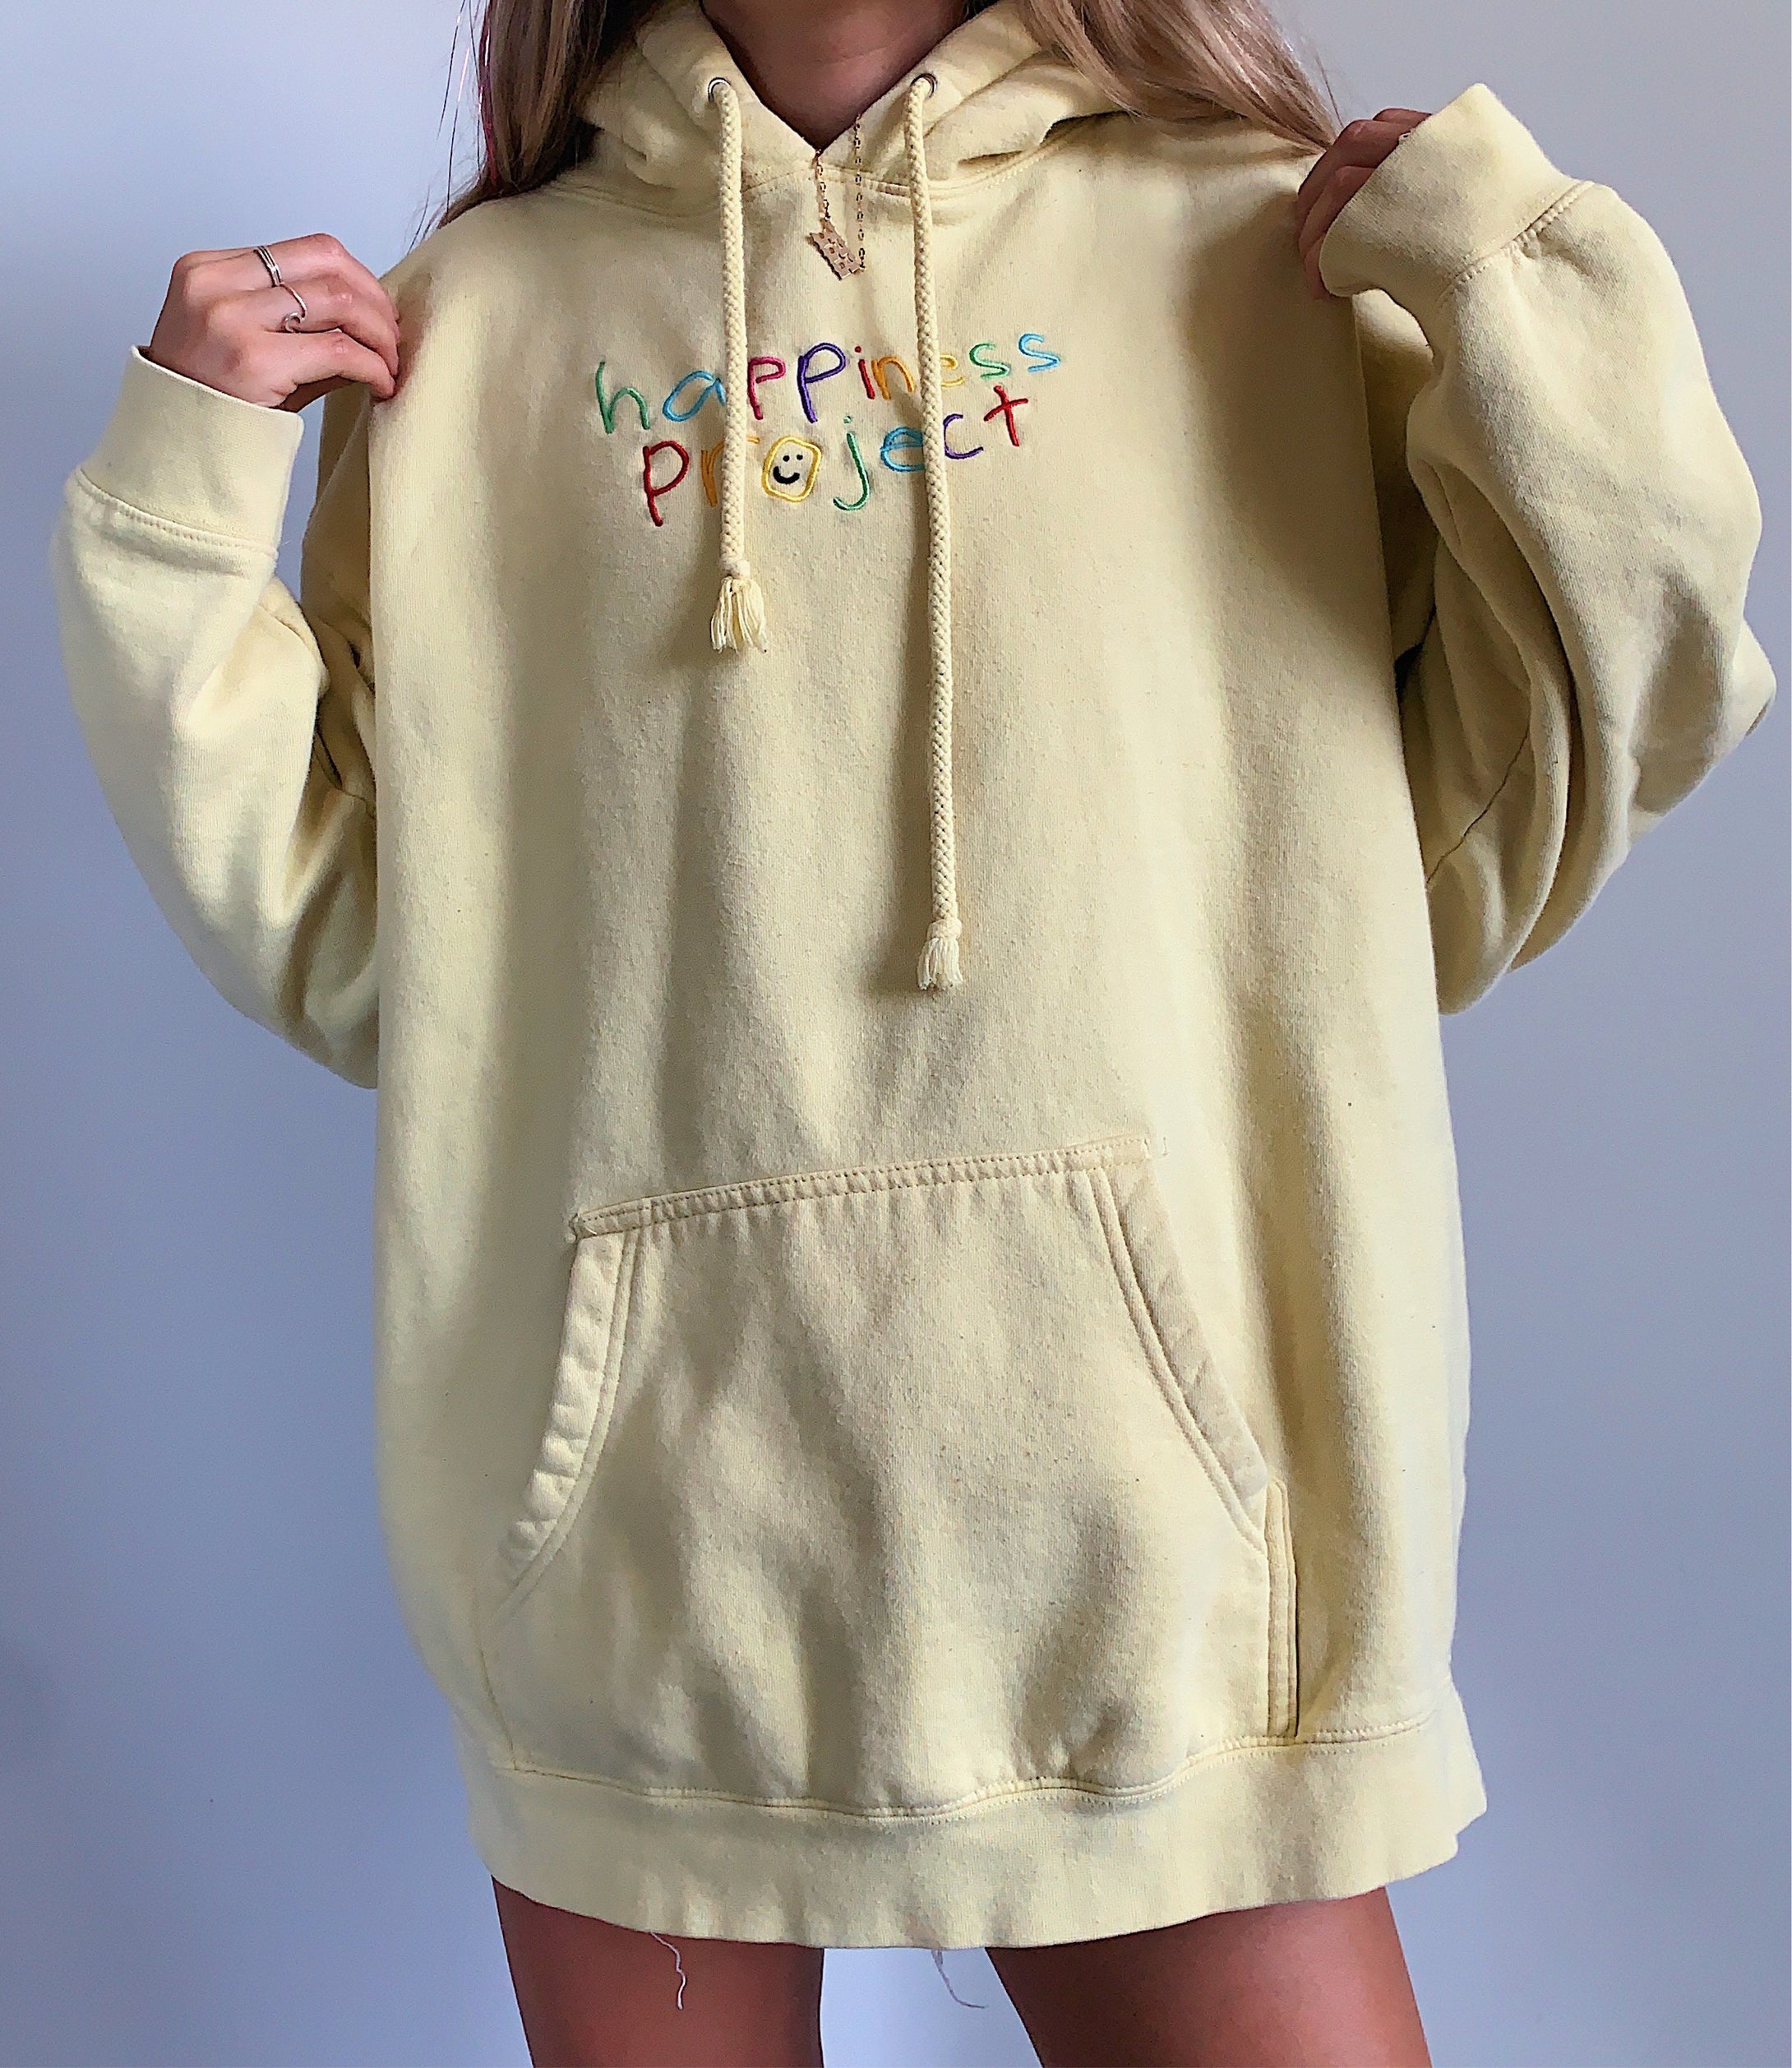 happiness project hoodie